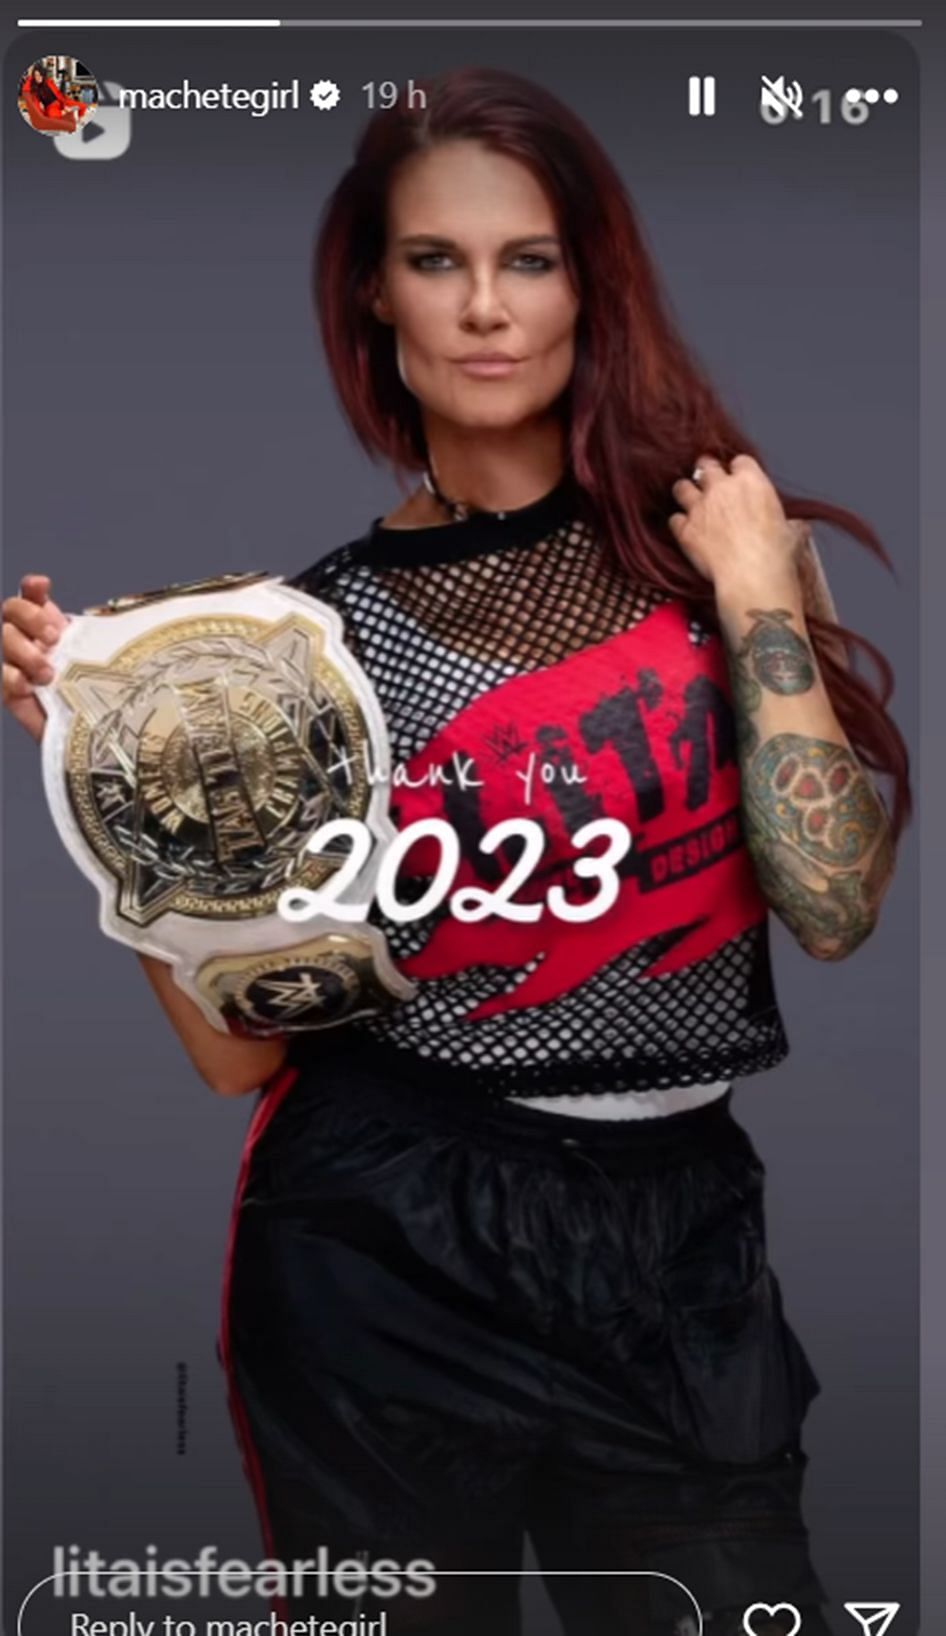 Is Lita dropping a tease here?